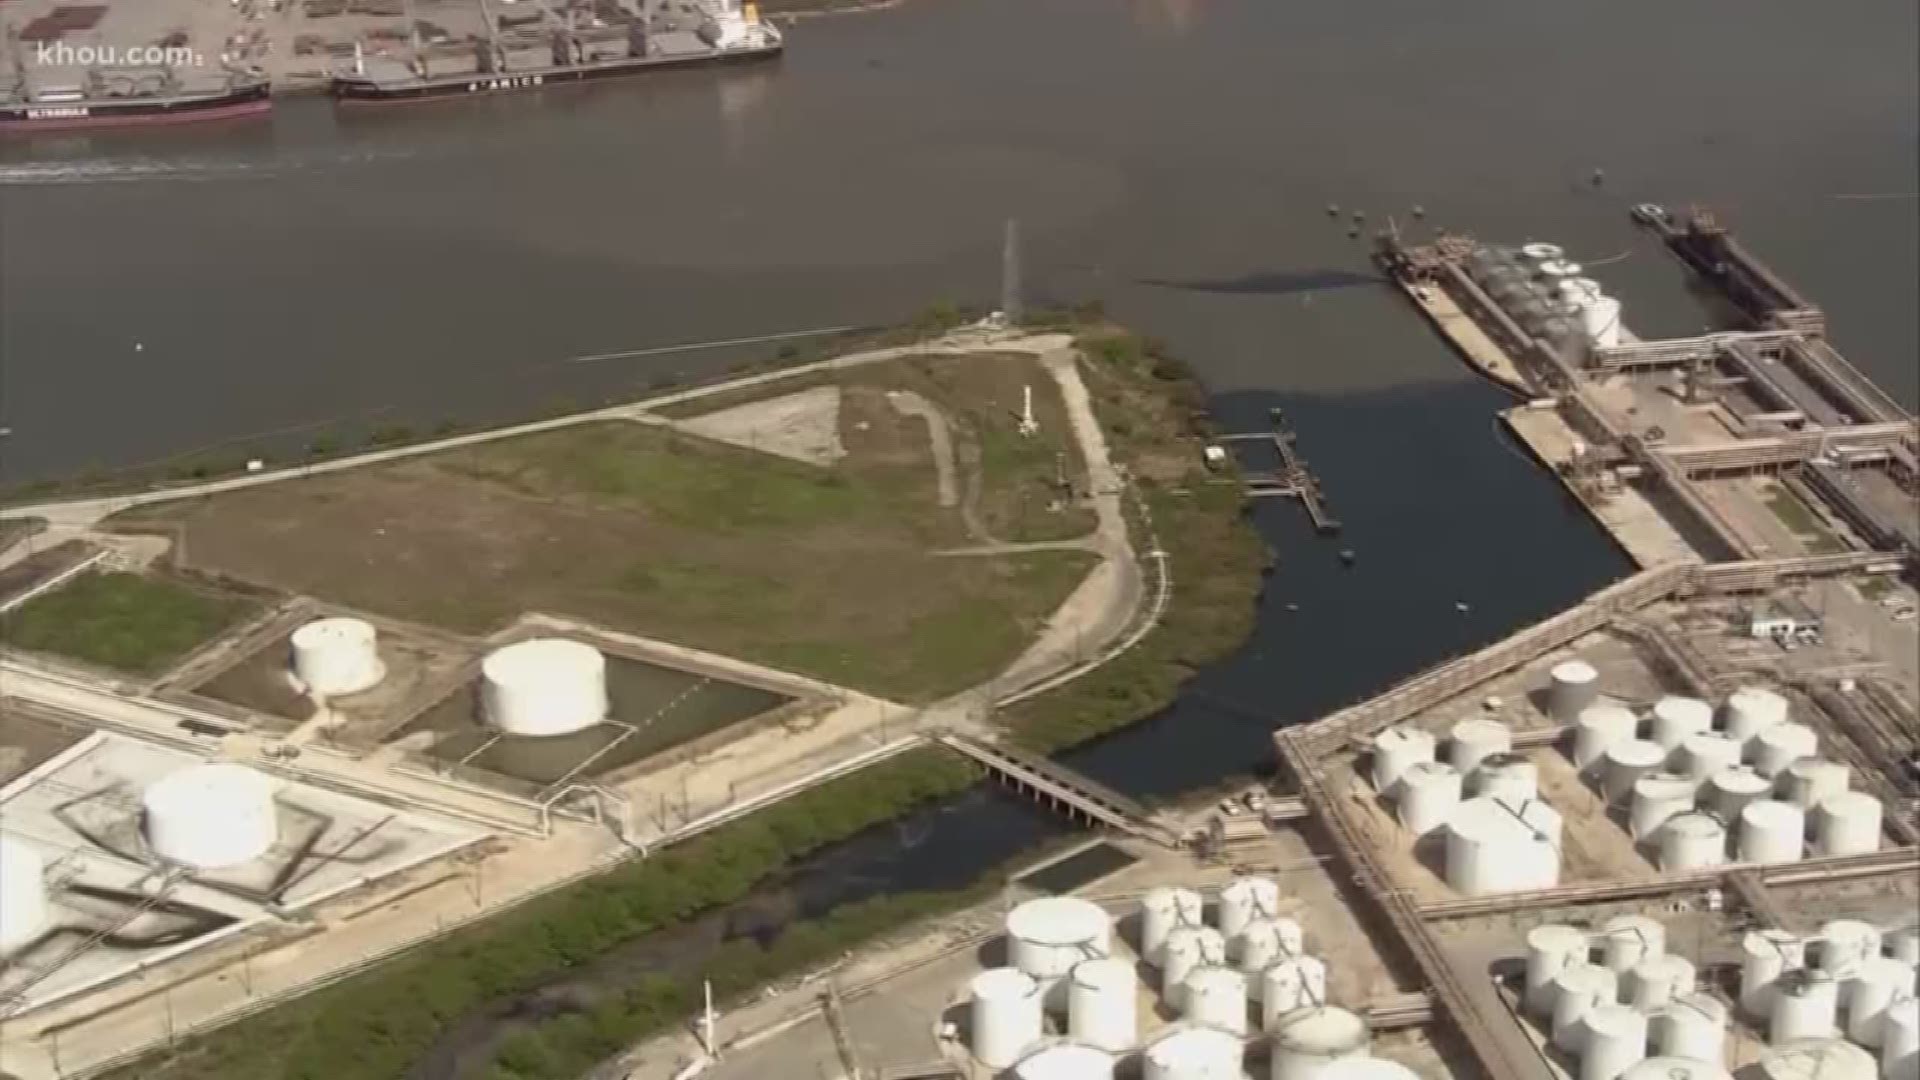 All of those chemicals from the ITC fire are flowing right toward the Houston Ship Channel. What kind of long term problems could that cause?